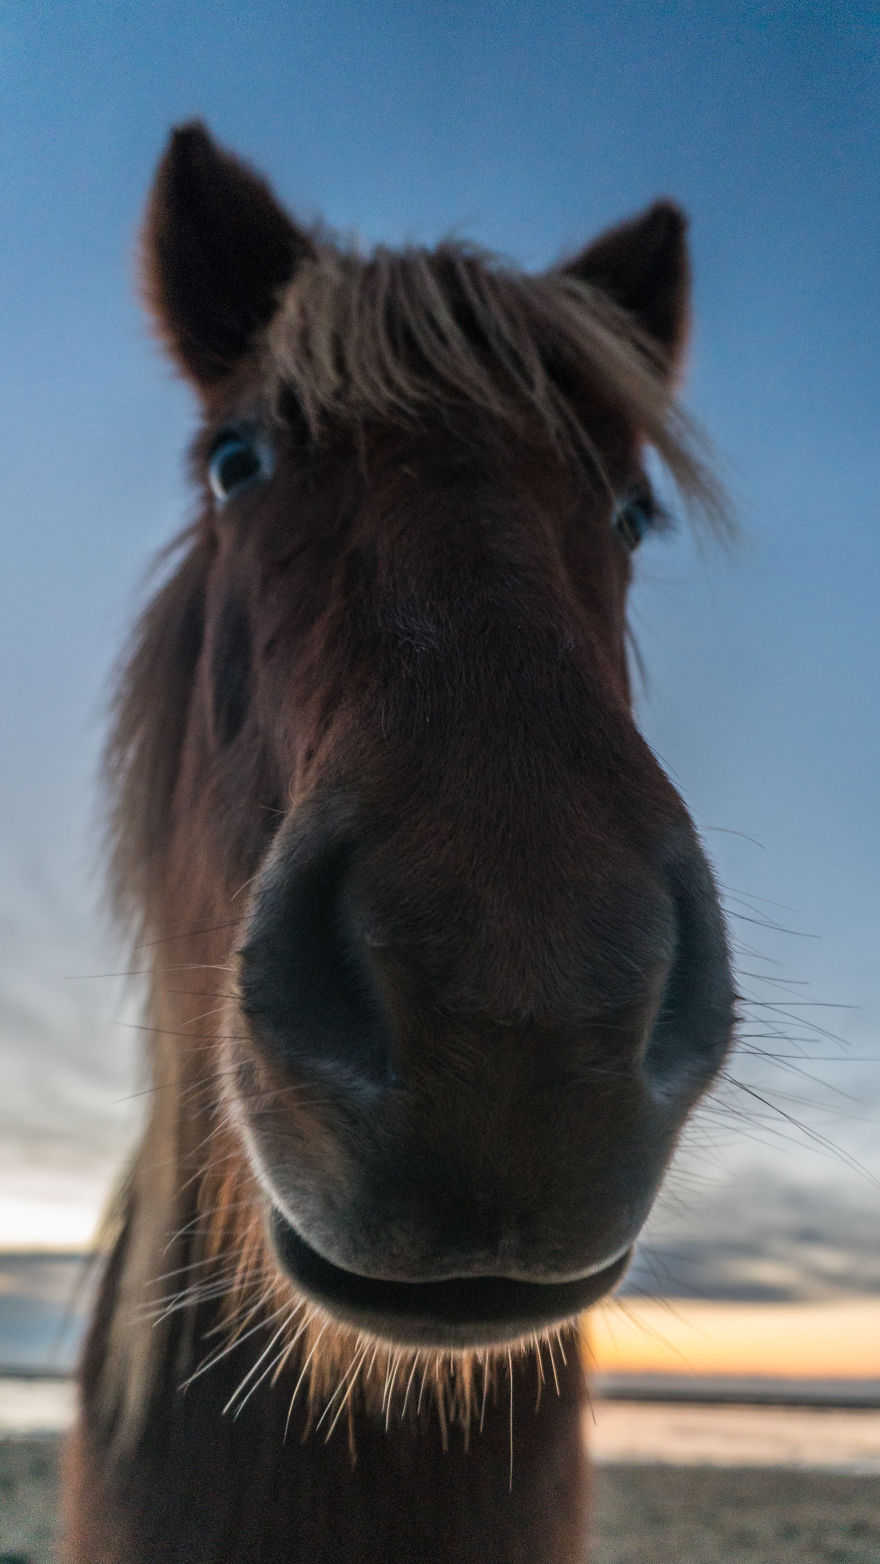 Silly Icelandic Horse